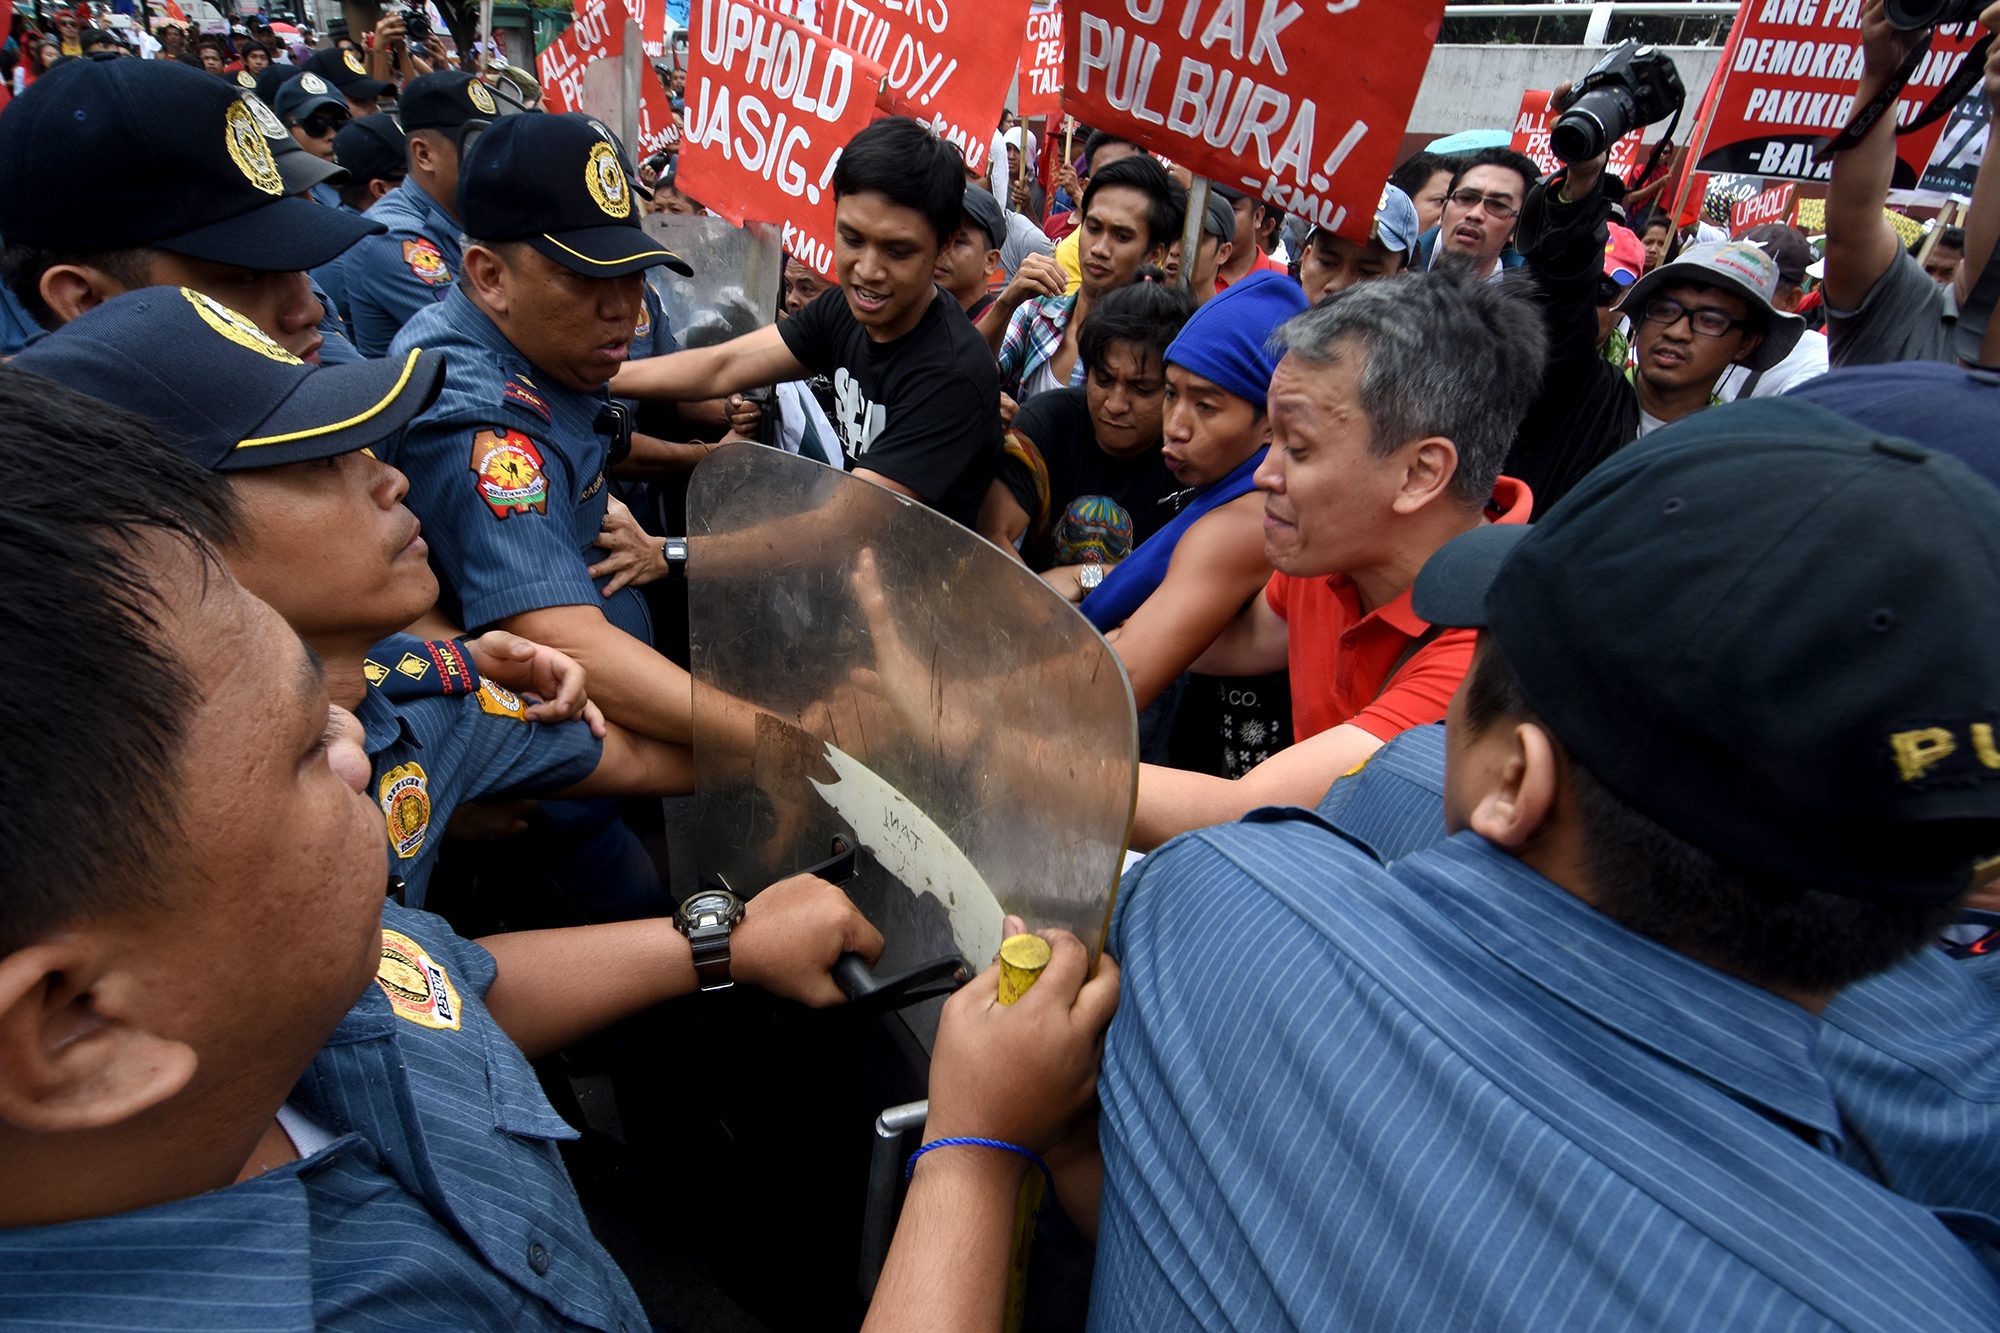 ENTER THE CAMP. Activists try to enter the gate of Camp Aguinaldo but are stopped by anti-riot policemen. Photo by Angie de Silva/Rappler  